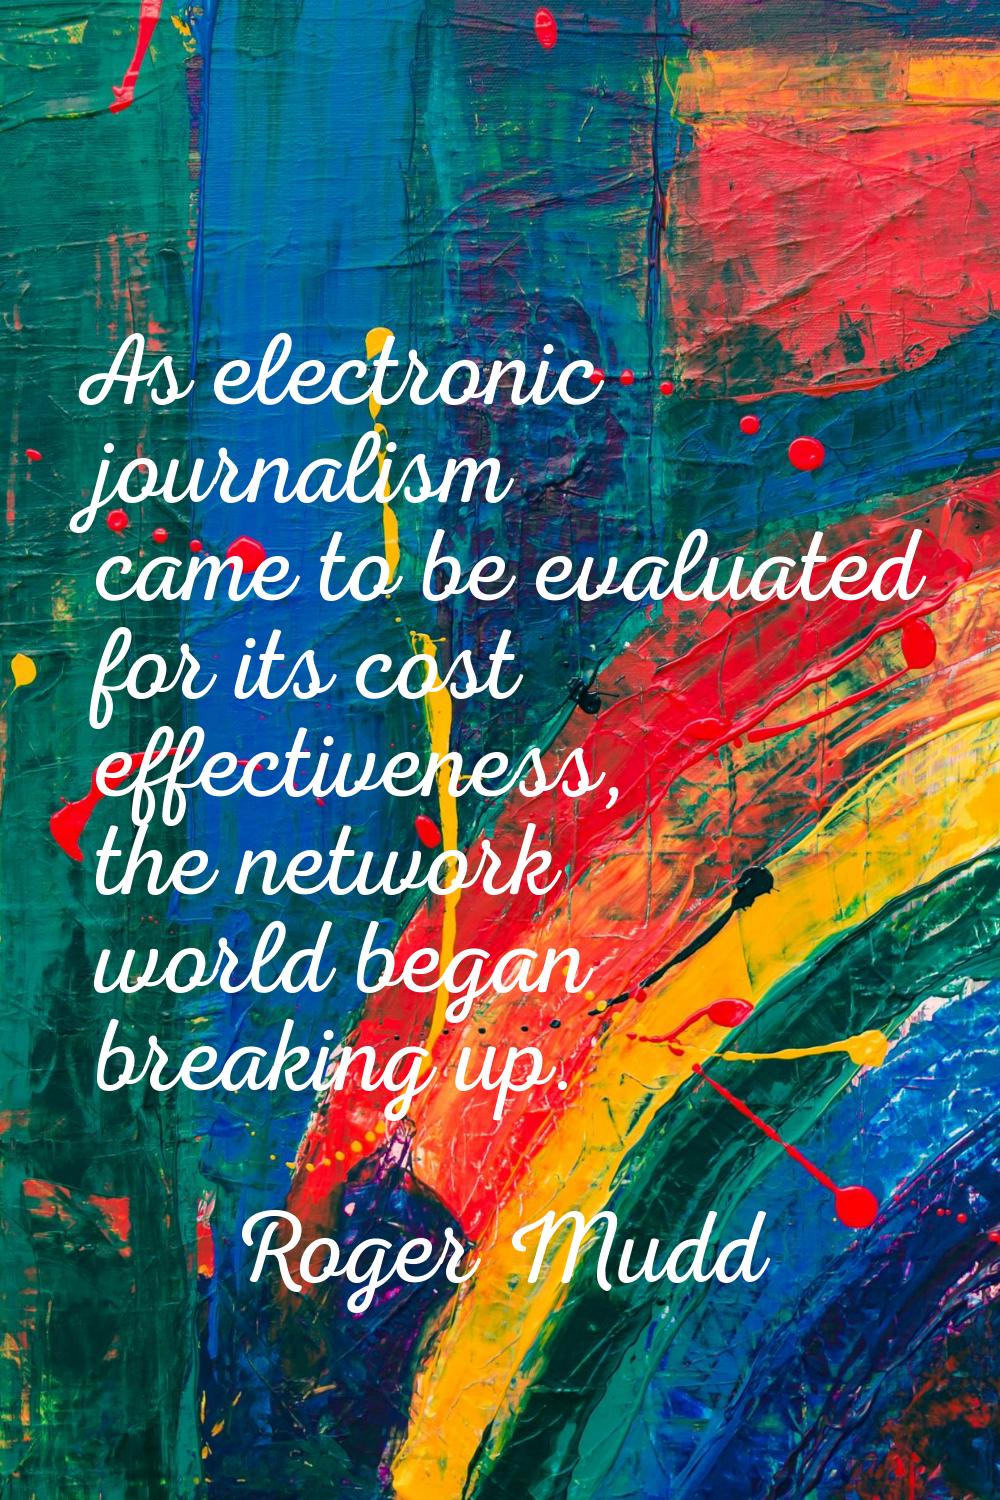 As electronic journalism came to be evaluated for its cost effectiveness, the network world began b